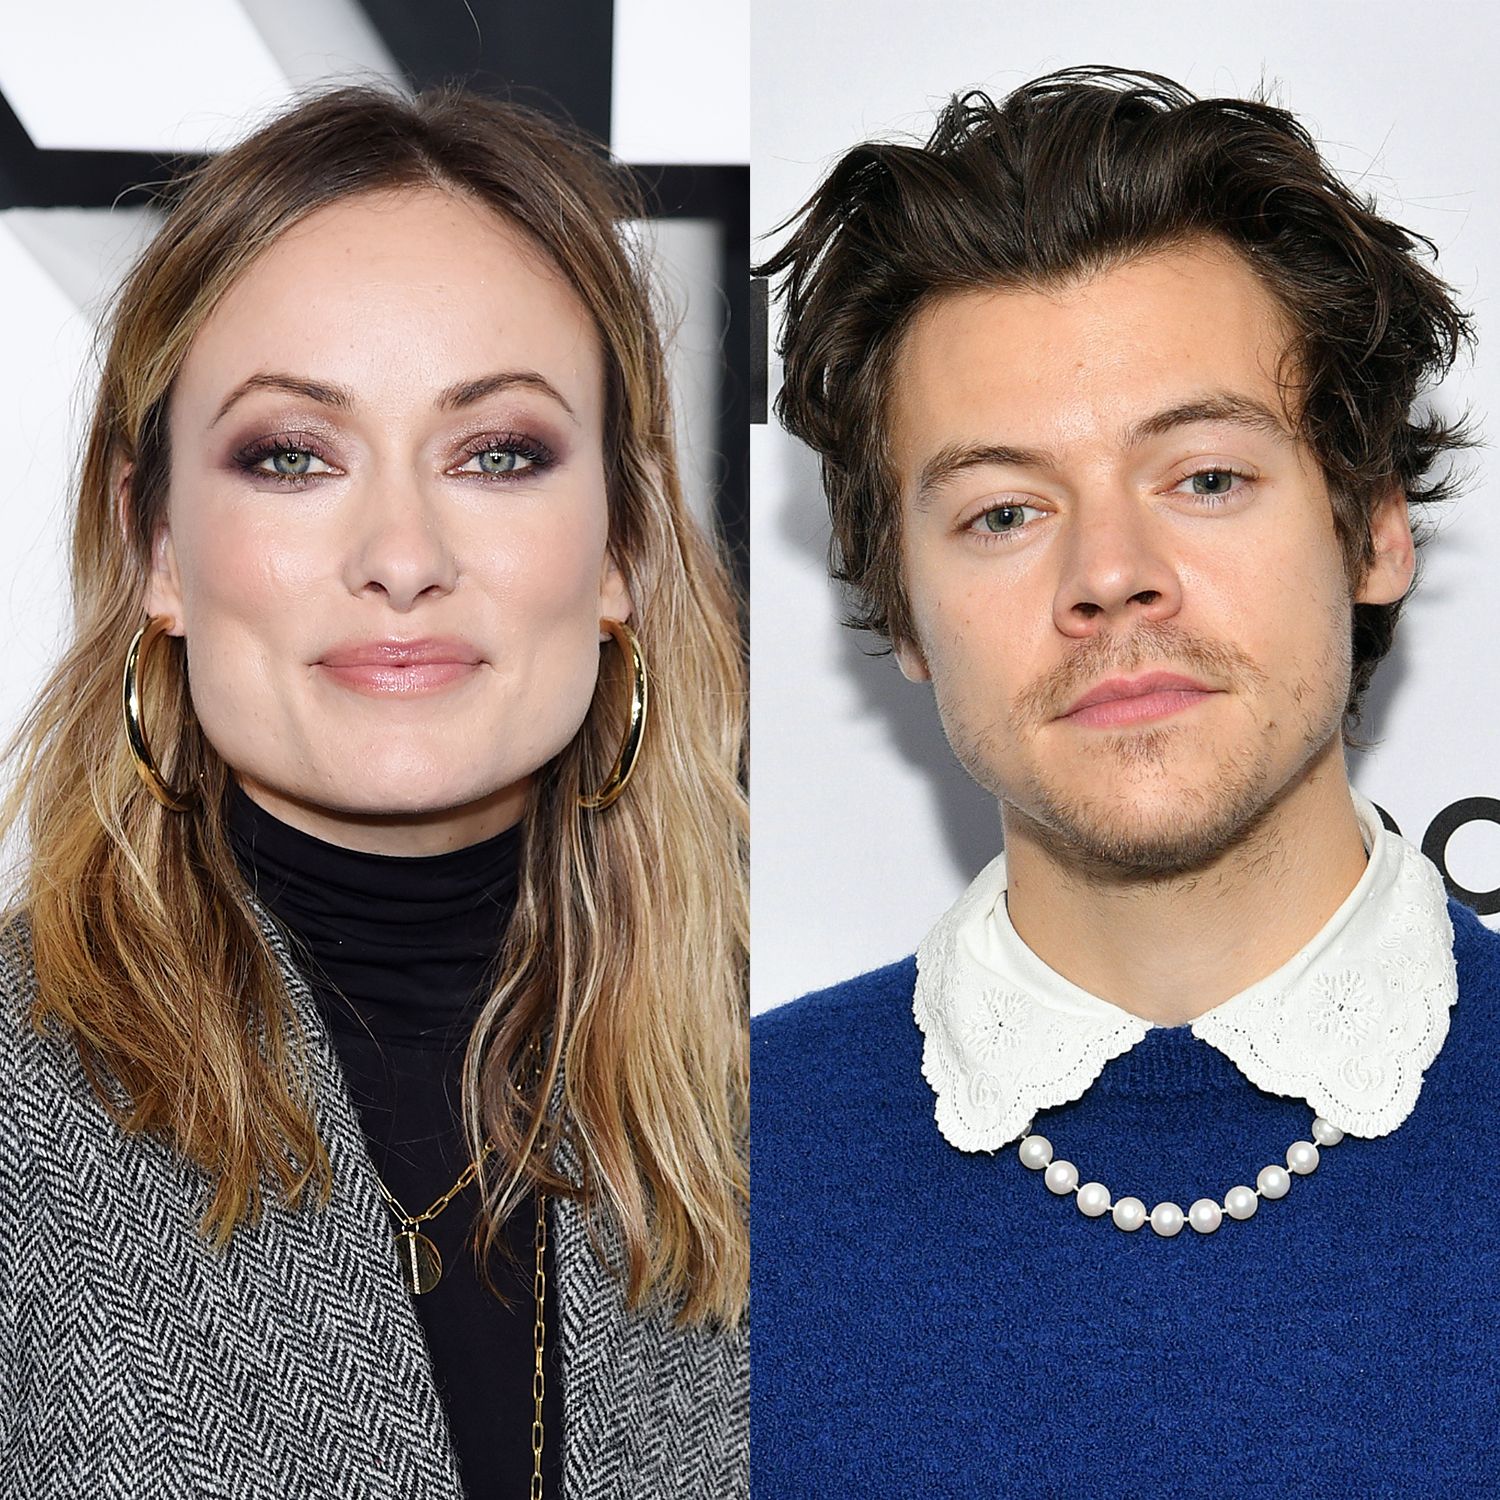 Olivia Wilde and Harry Styles break up after 2 years of dating